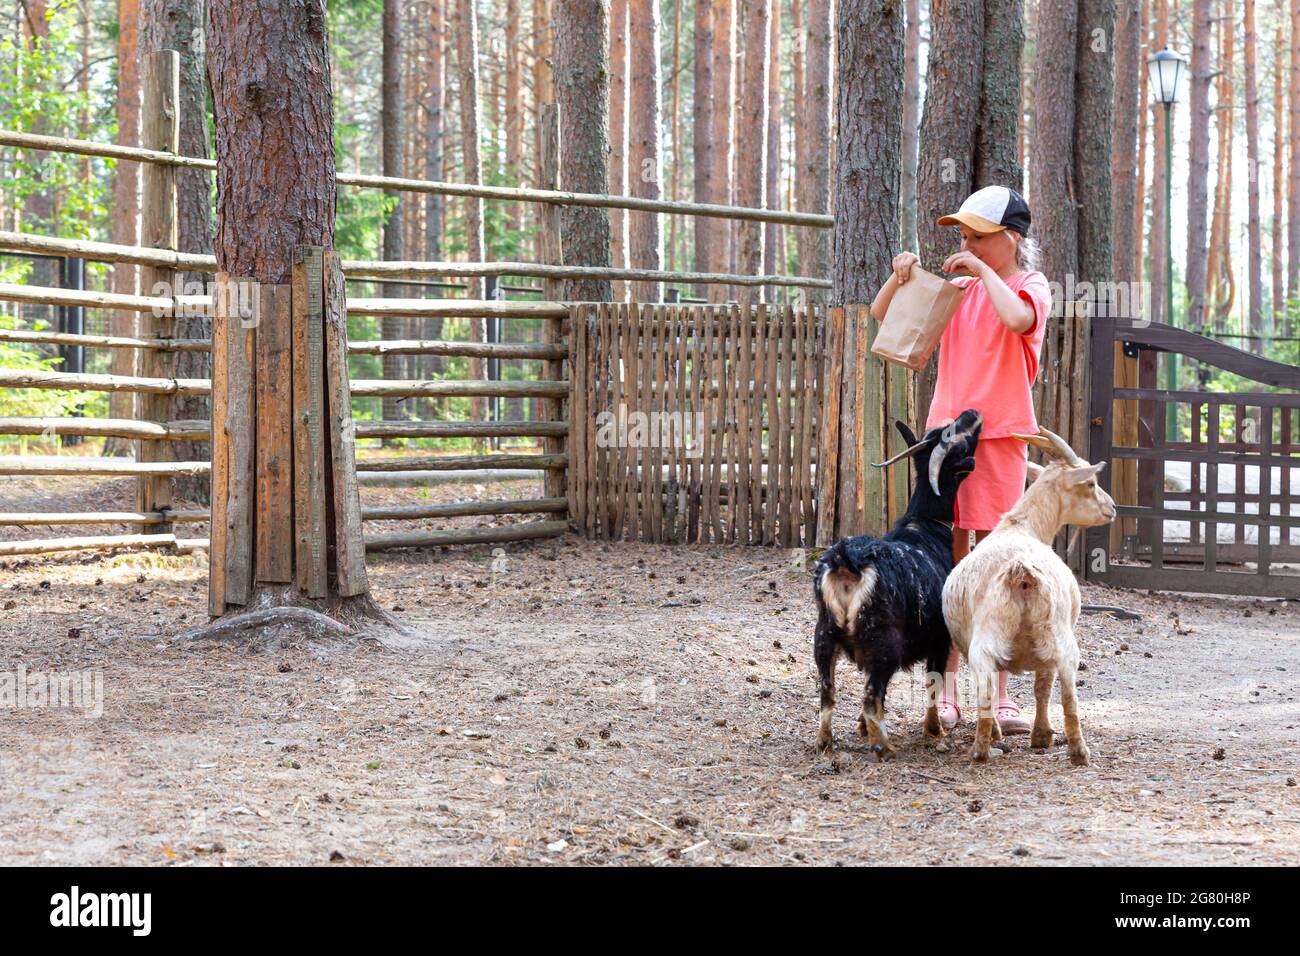 A 10-11 year old child feeds two goats from a paper bag at a zoo or farm. Animals in the petting zoo. African pygmy miniature Cameroon goat. Caring Stock Photo